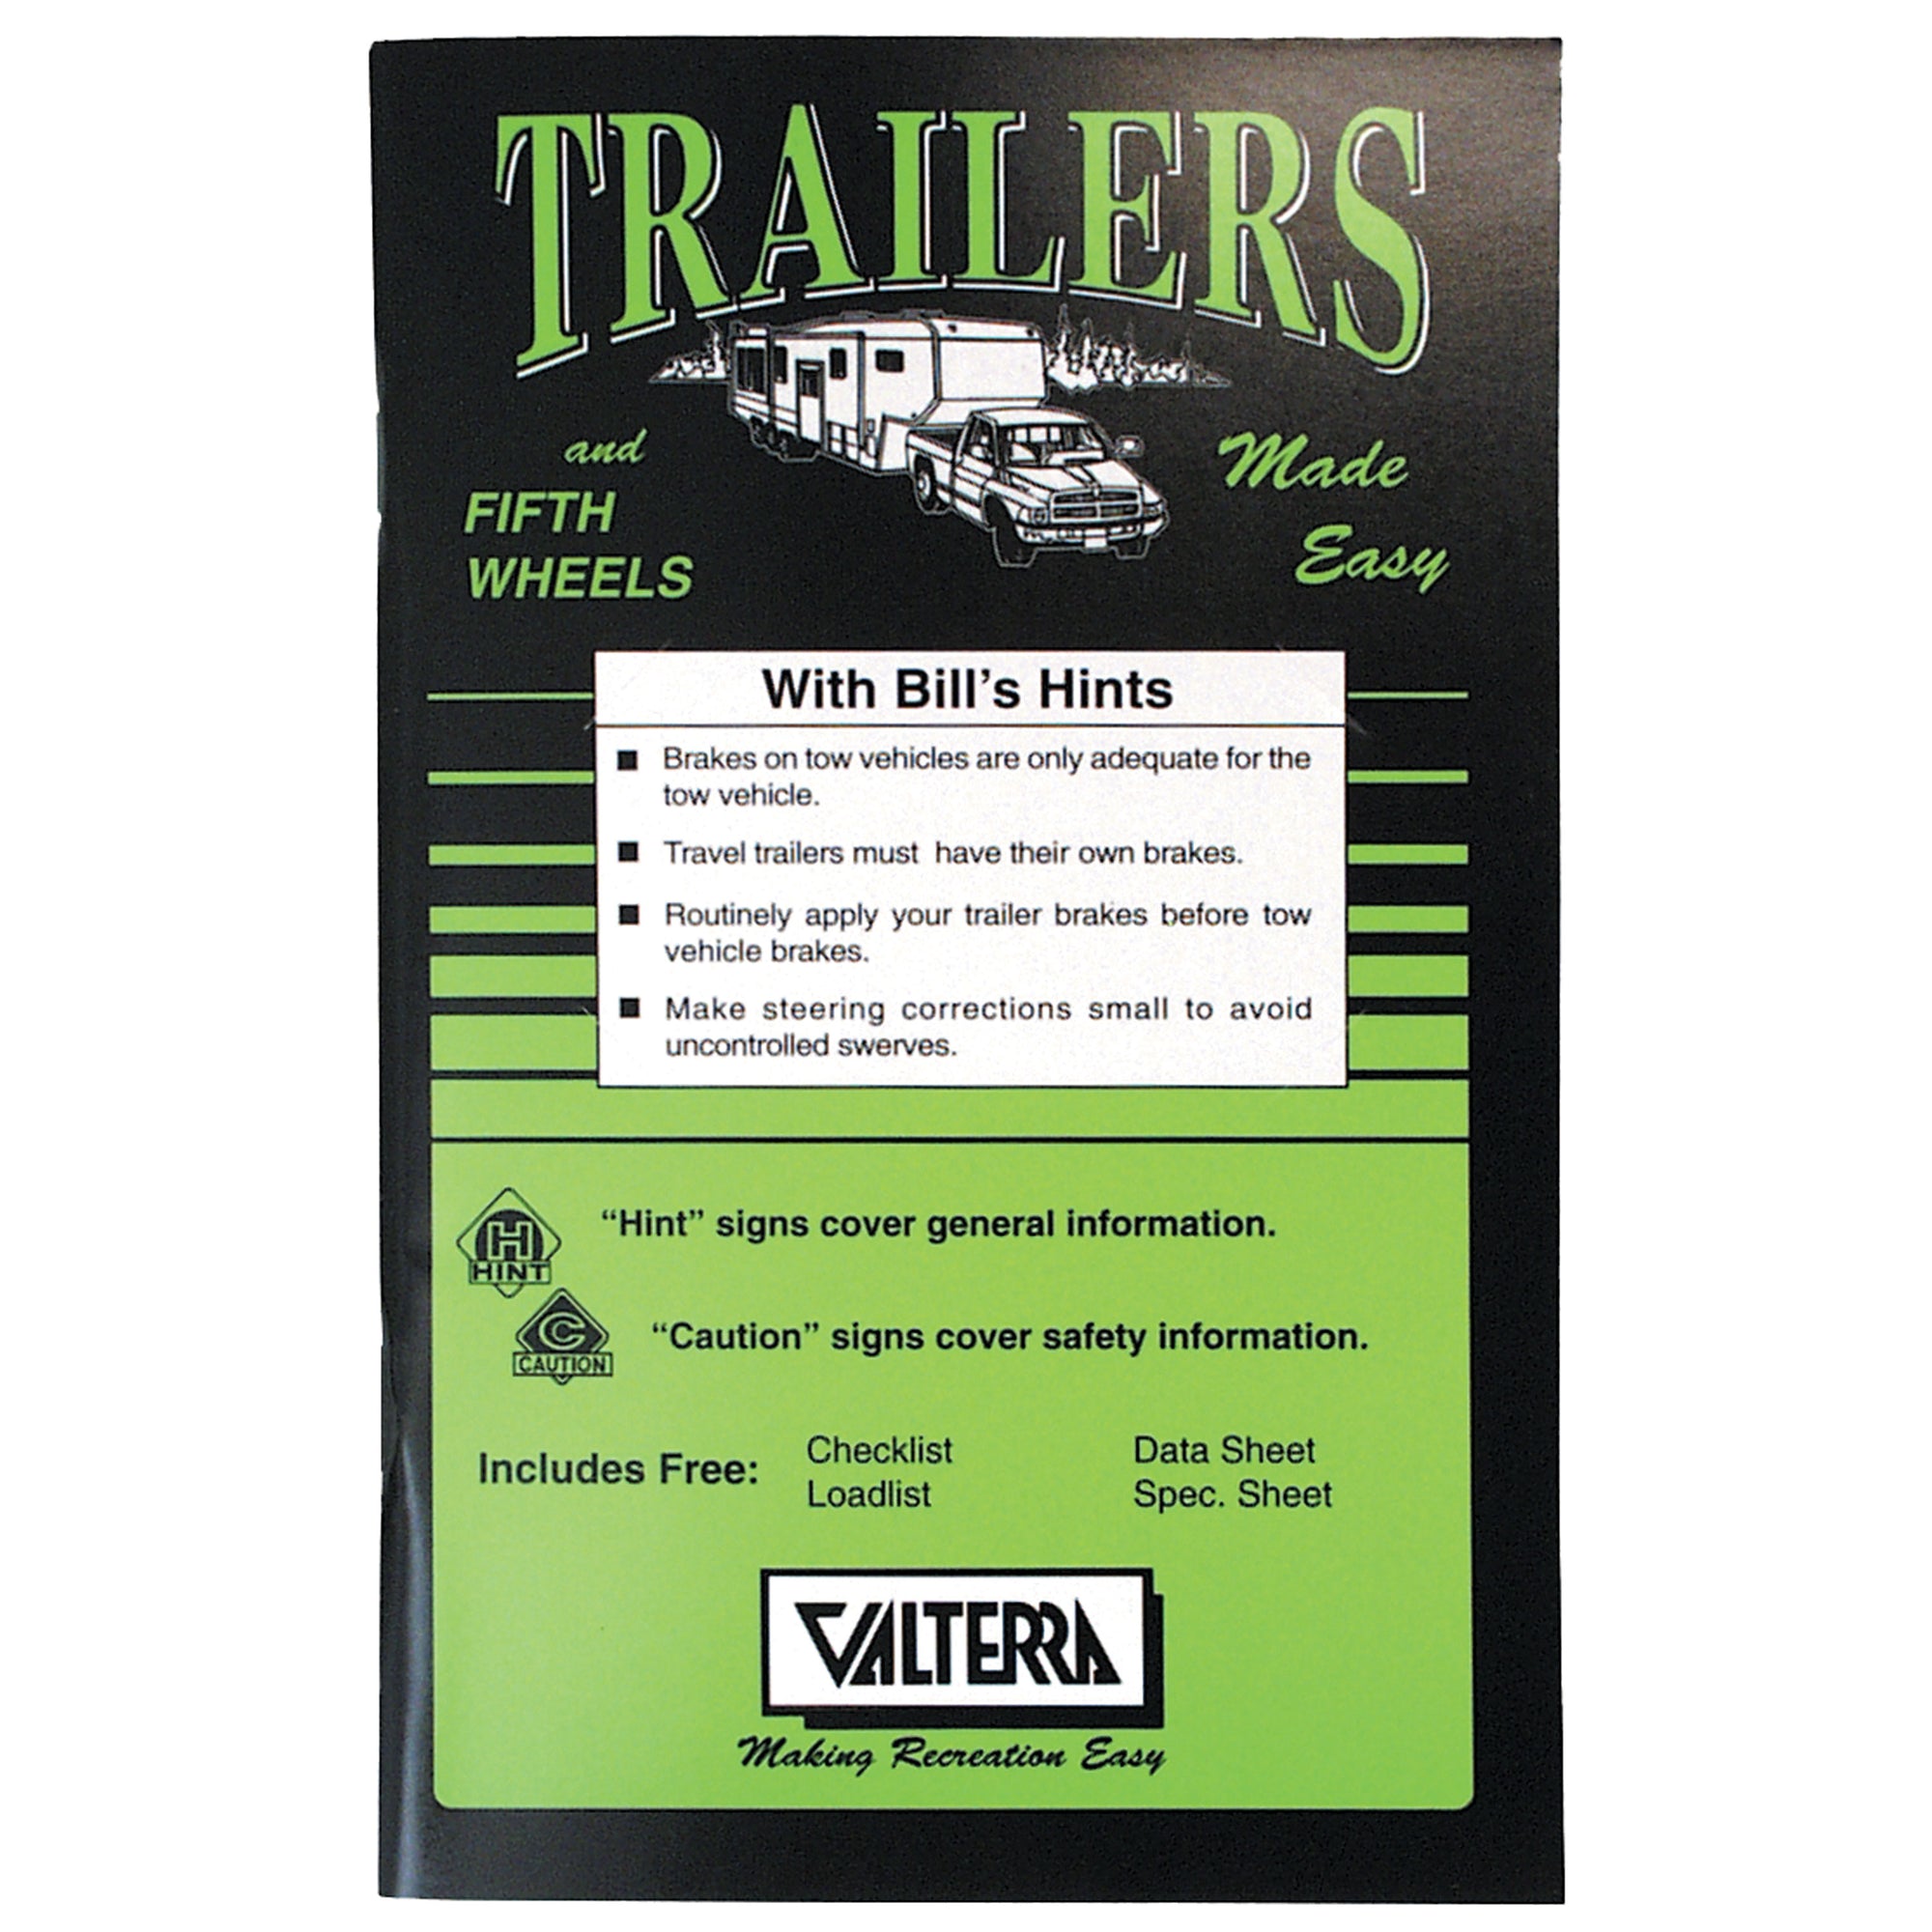 Valterra A02-2000 Bill's Hints: Trailers and Fifth Wheels Made Easy